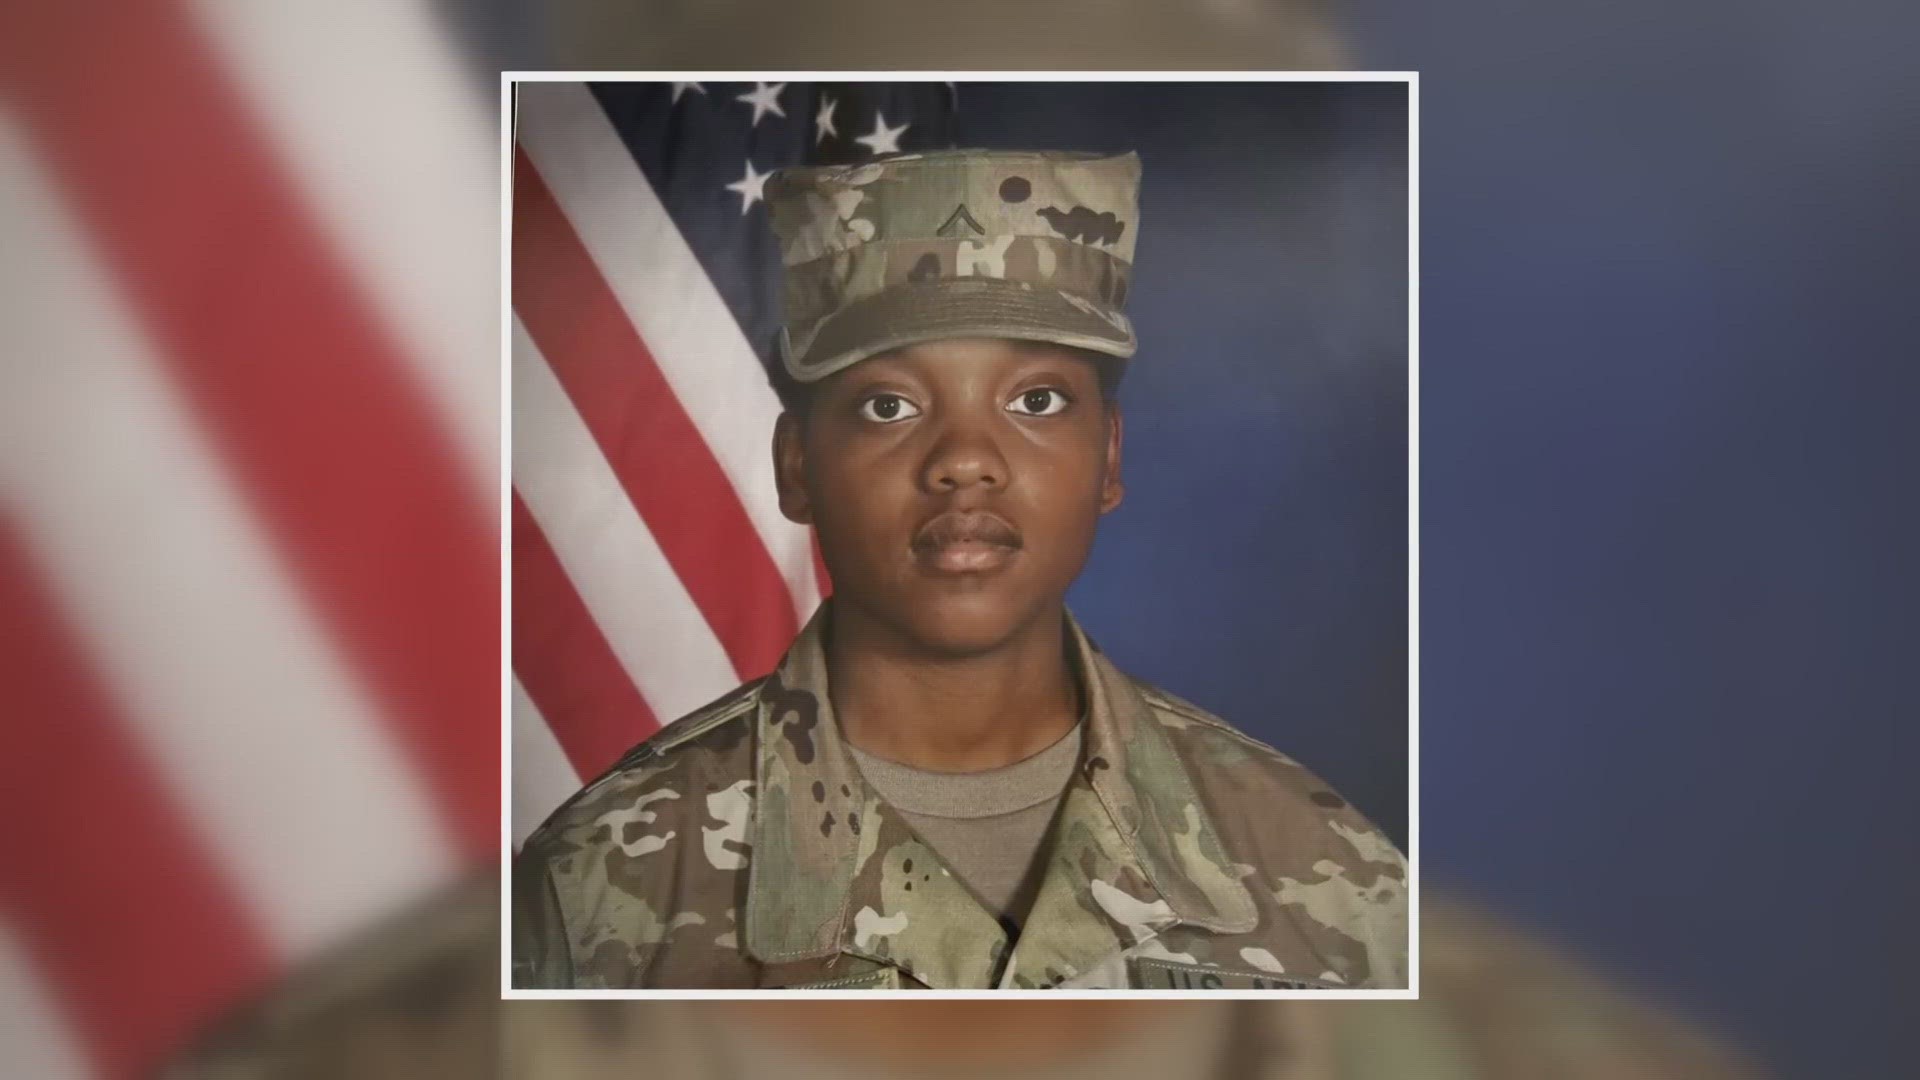 The body of Army Sgt. Kennedy L. Sanders will arrive in Jacksonville, Fla. Wednesday morning. An escort will follow to her hometown of Waycross, Ga.